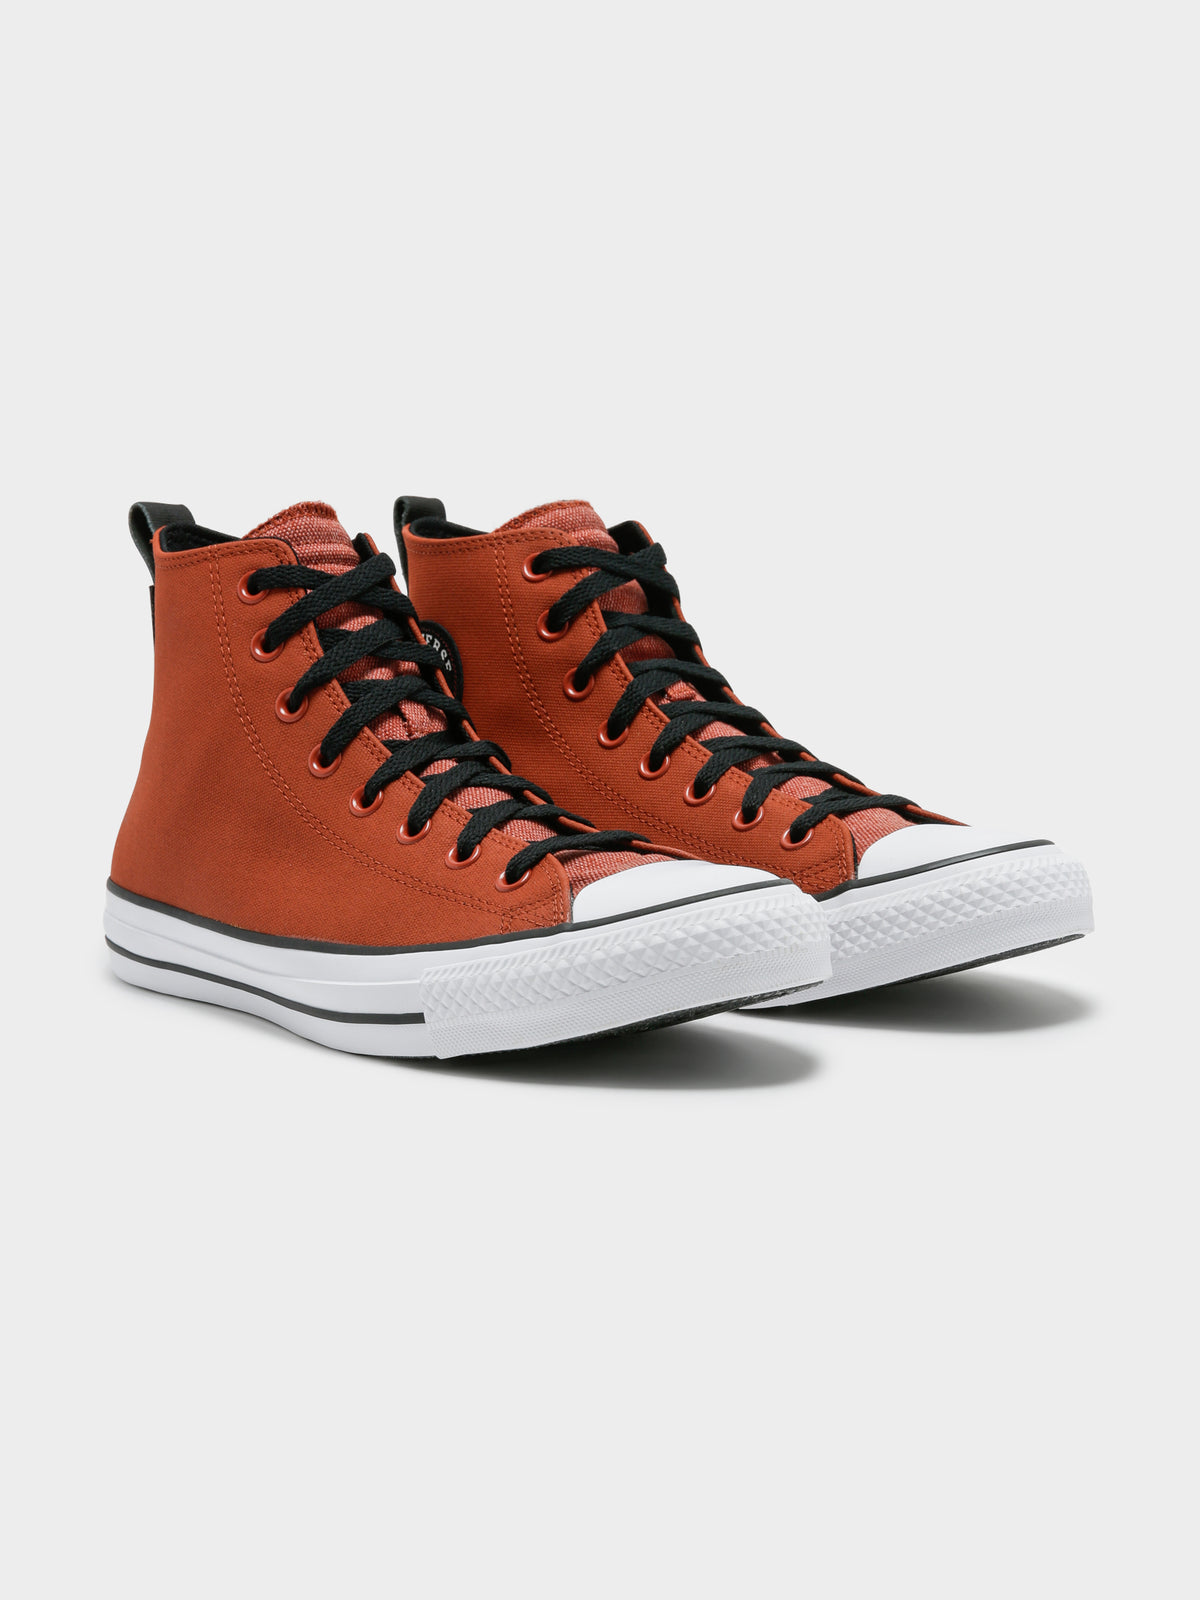 Unisex Chuck Taylor All Star High Top in Brown &amp; Black